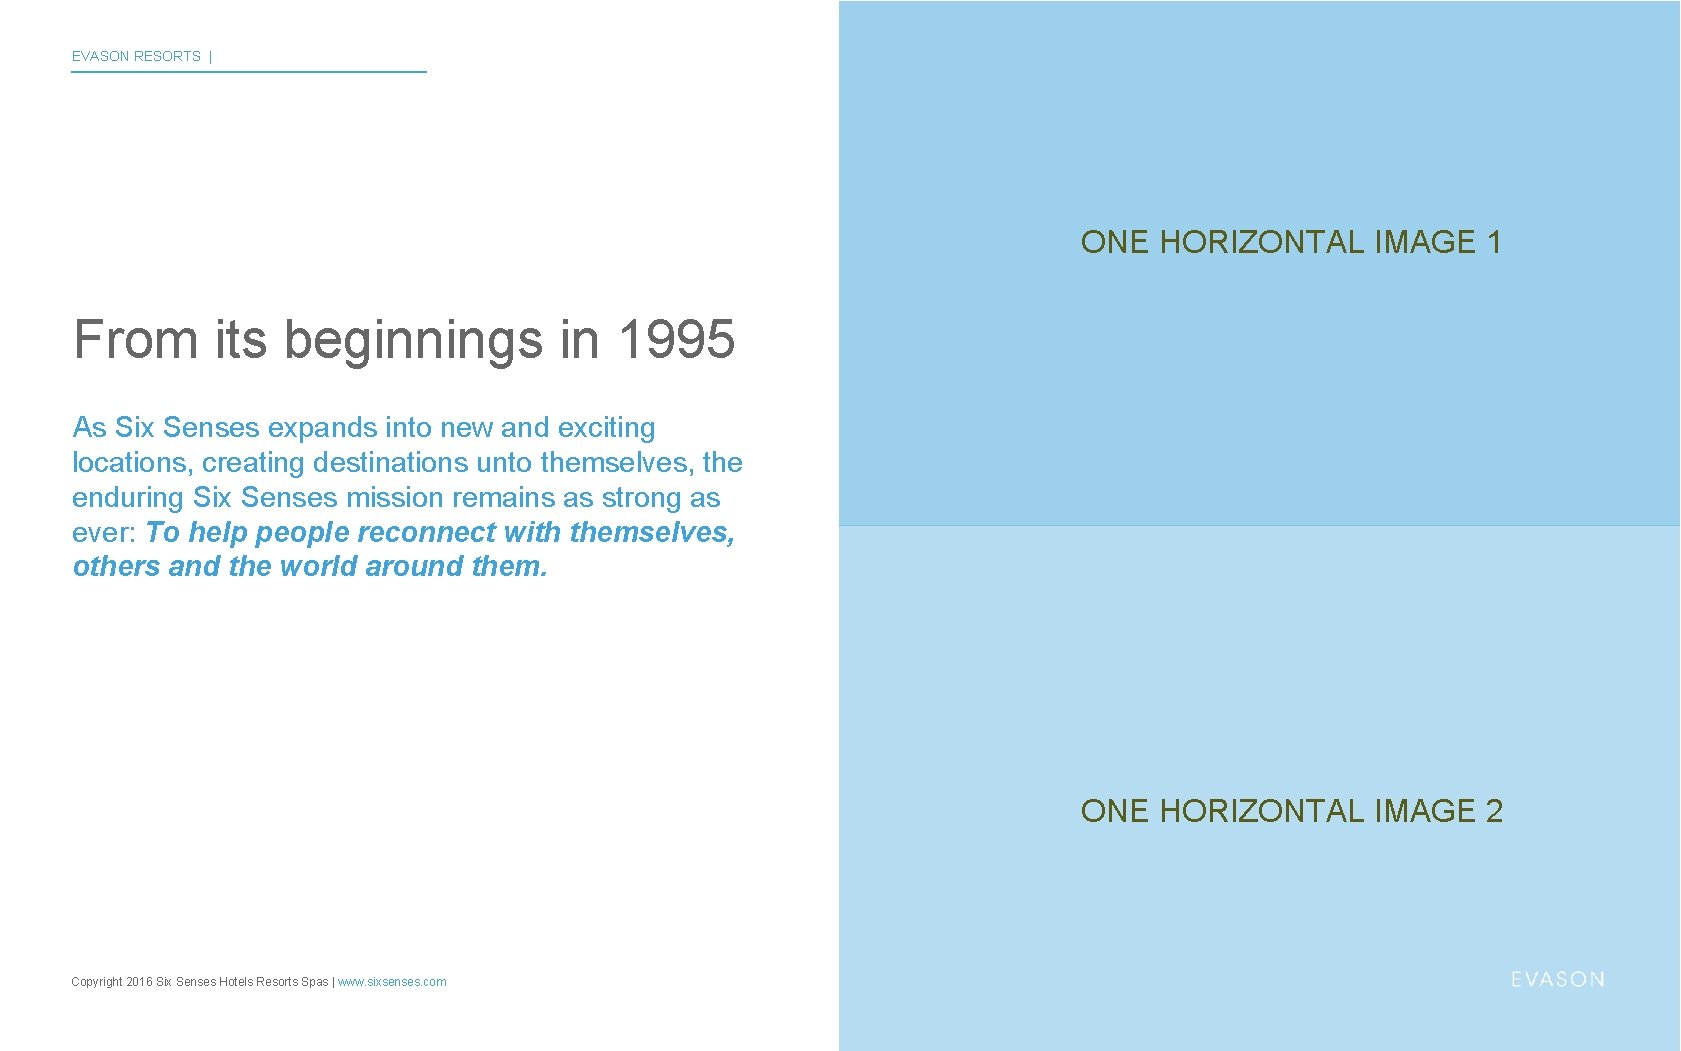 EVASON RESORTS | ONE HORIZONTAL IMAGE 1 From its beginnings in 1995 As Six